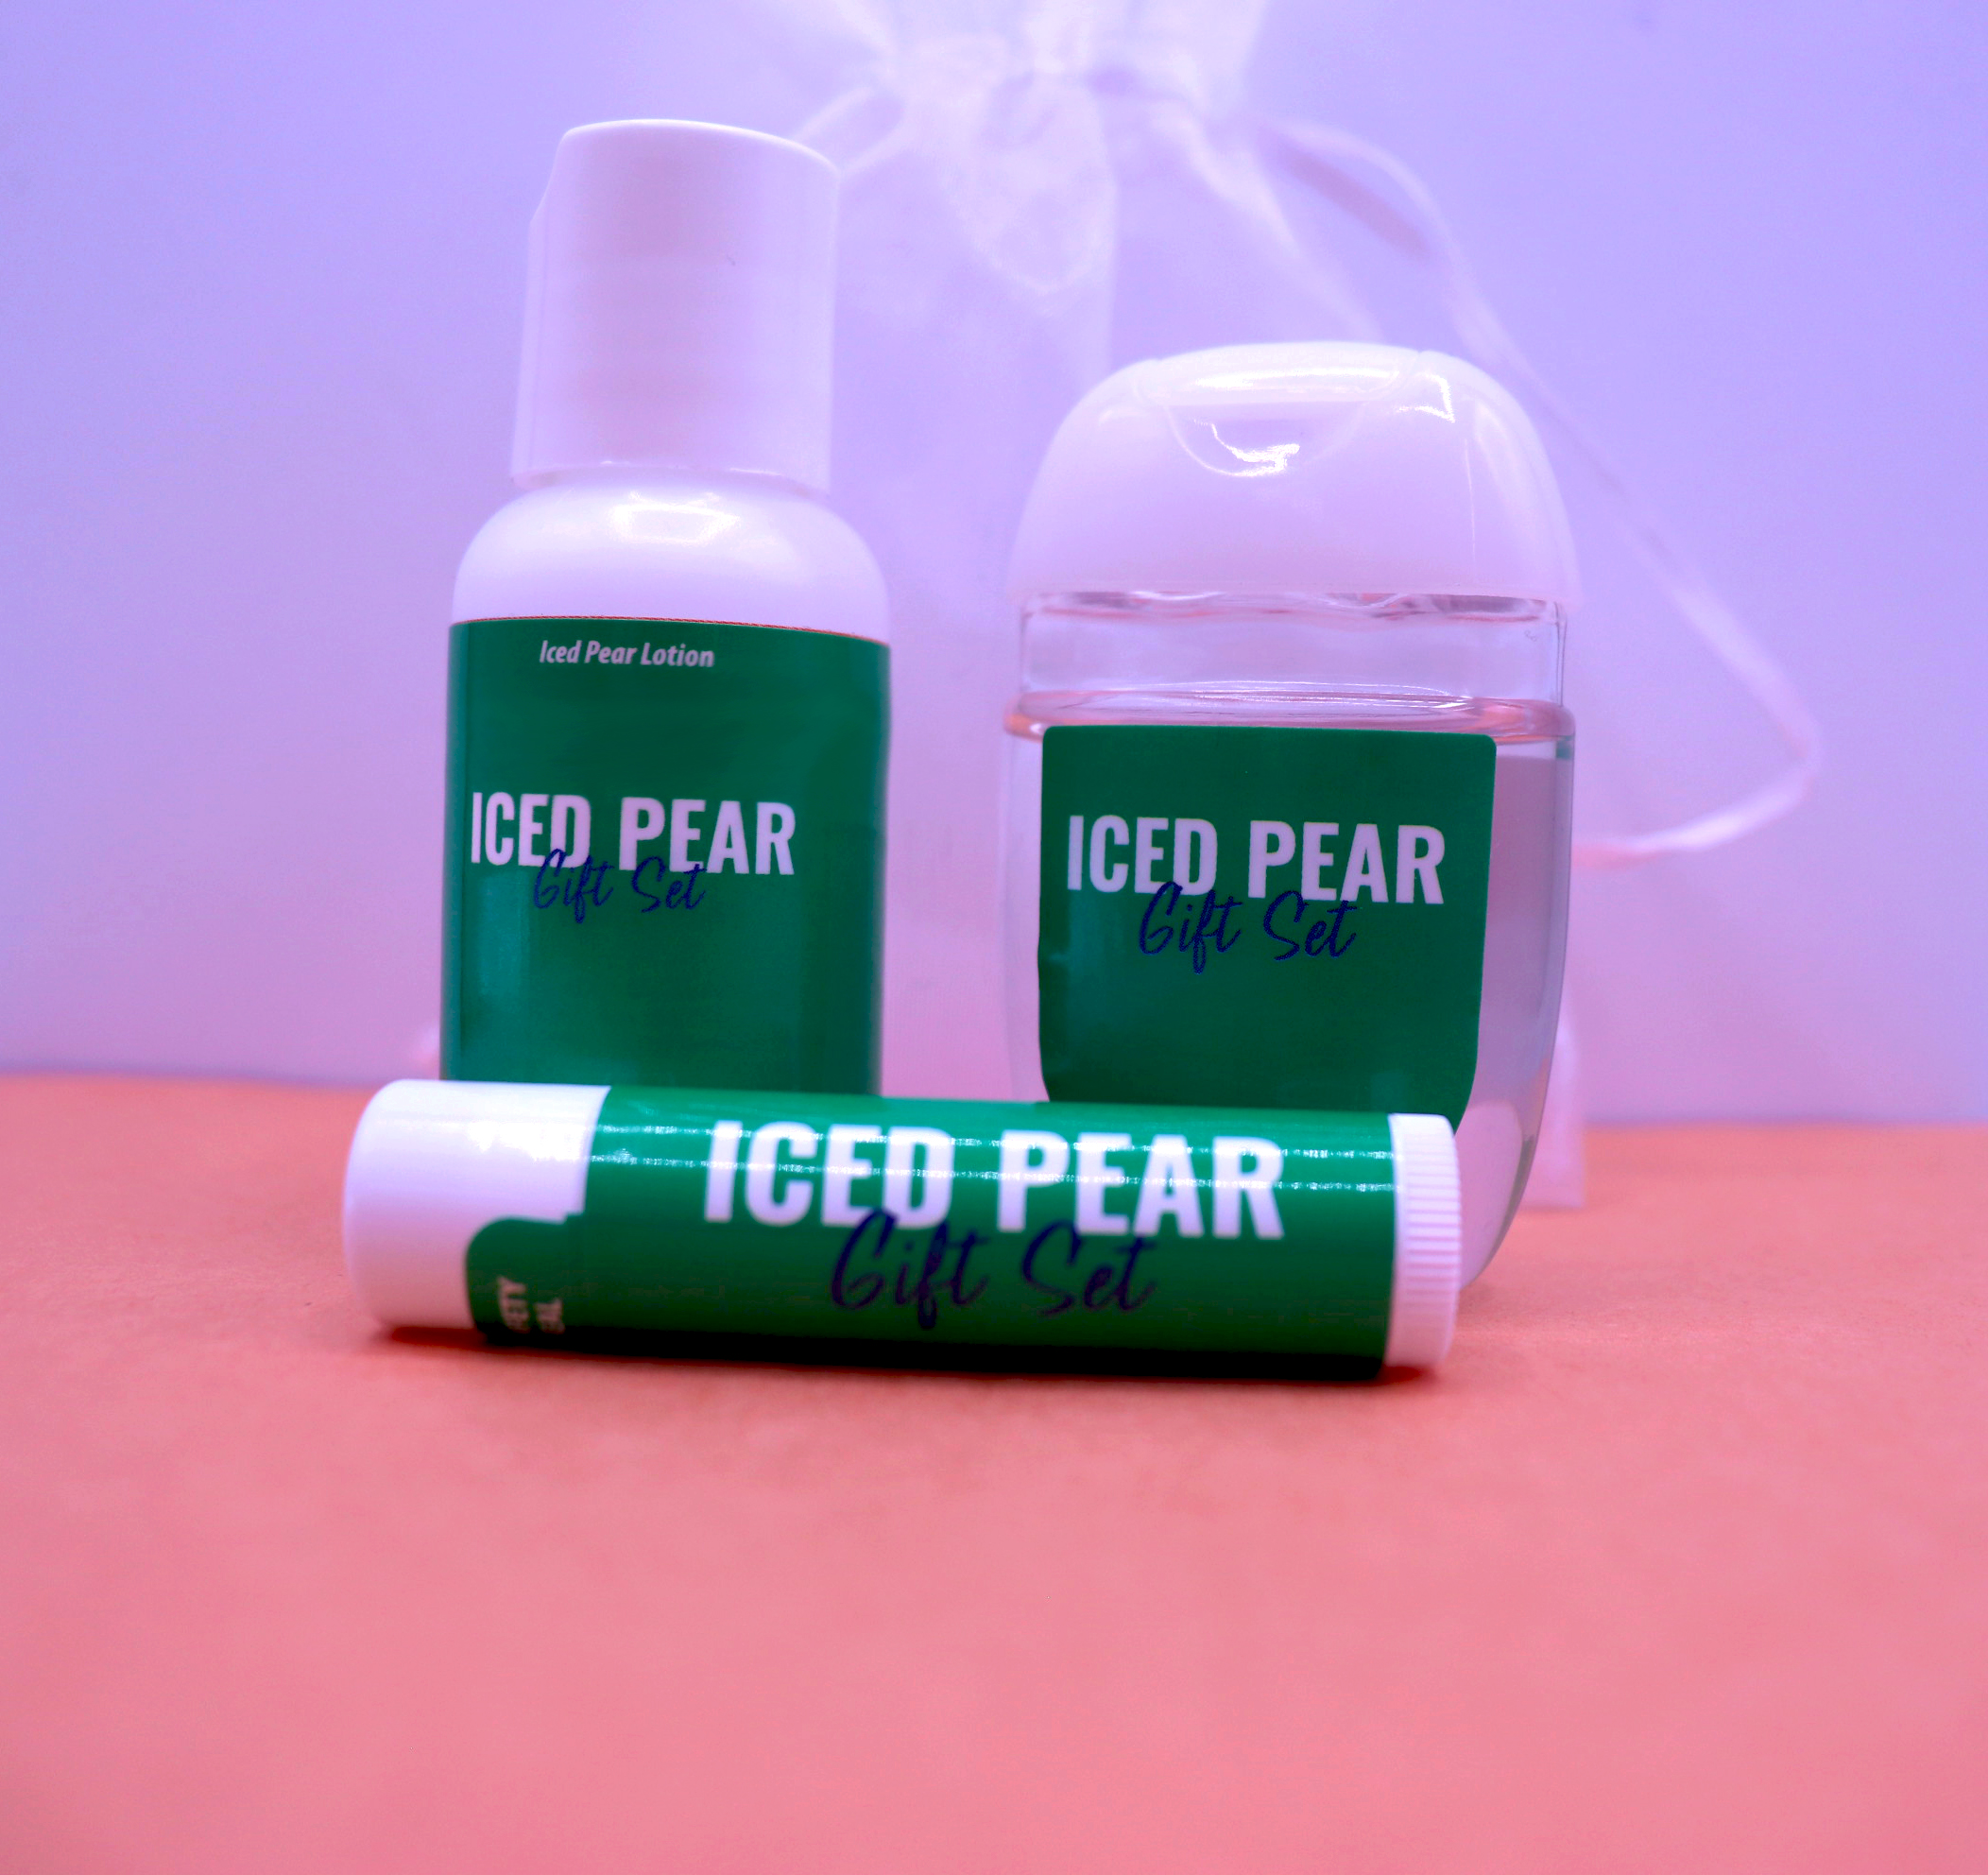 iced pear gift set 4